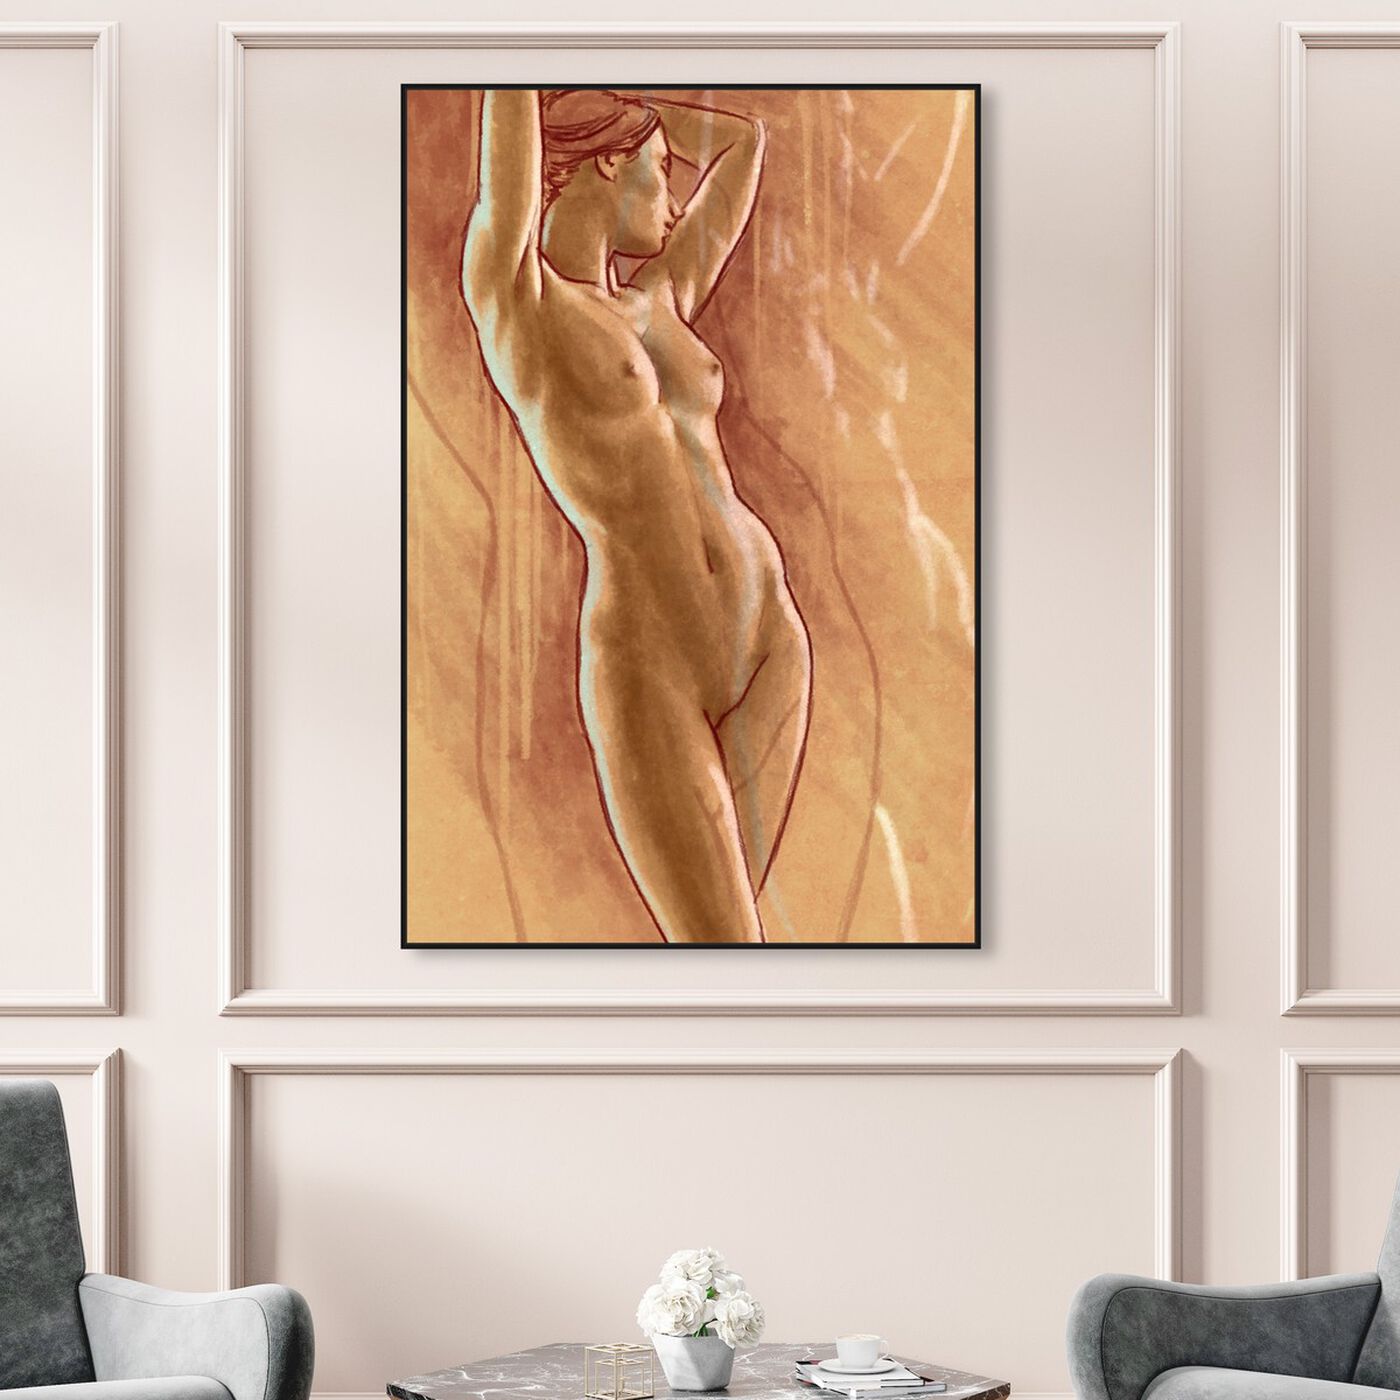 Hanging view of Warmth featuring people and portraits and nudes art.